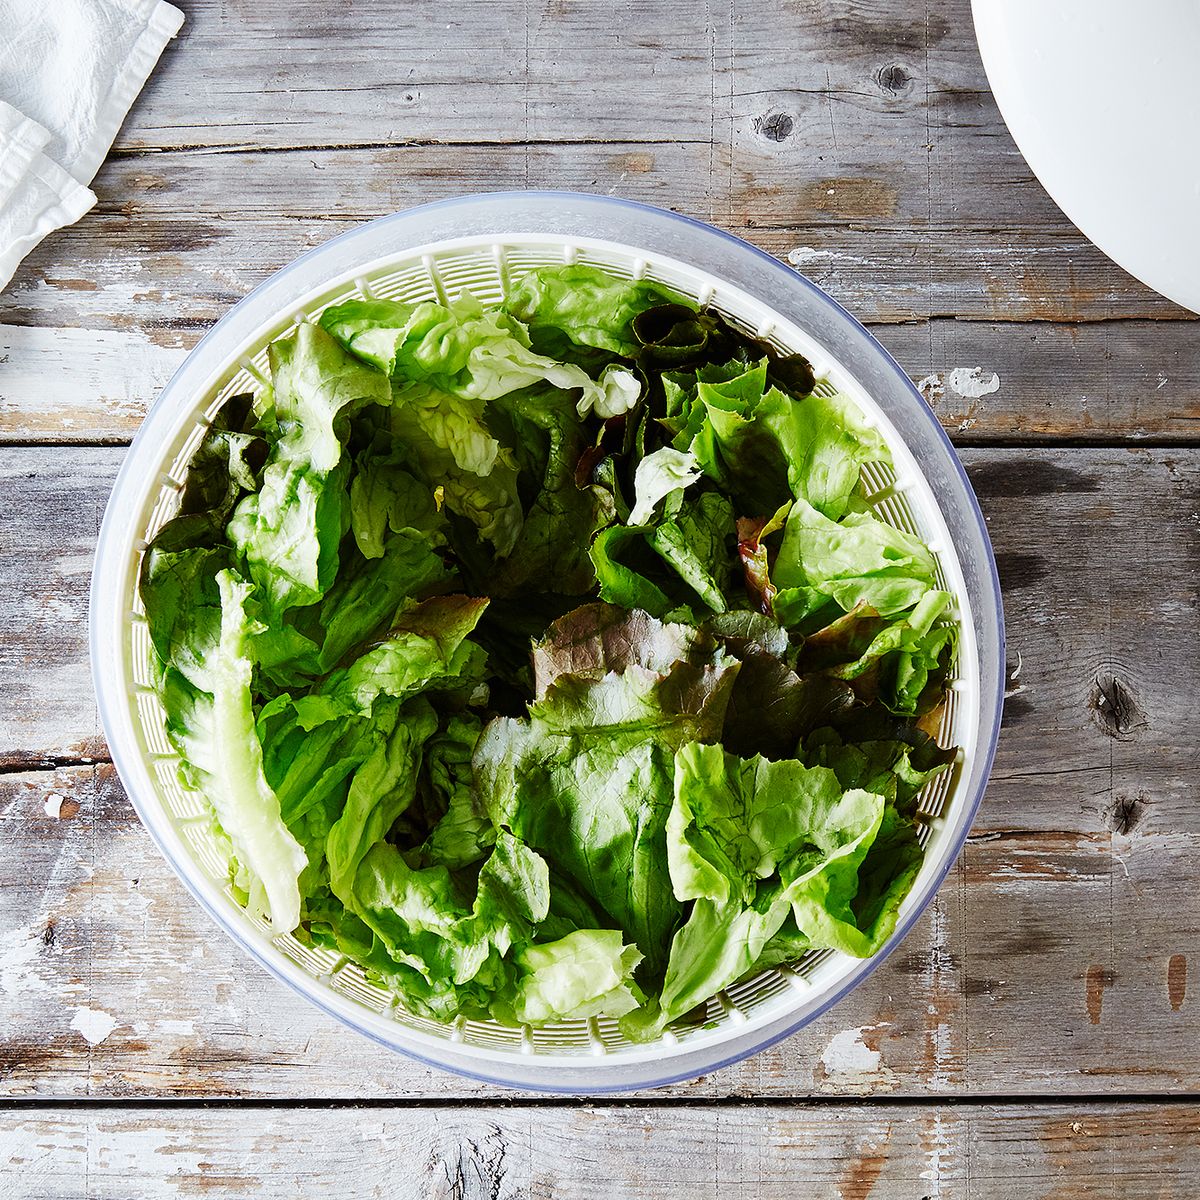 What's The Best Way To Store Lettuce And Other Greens?